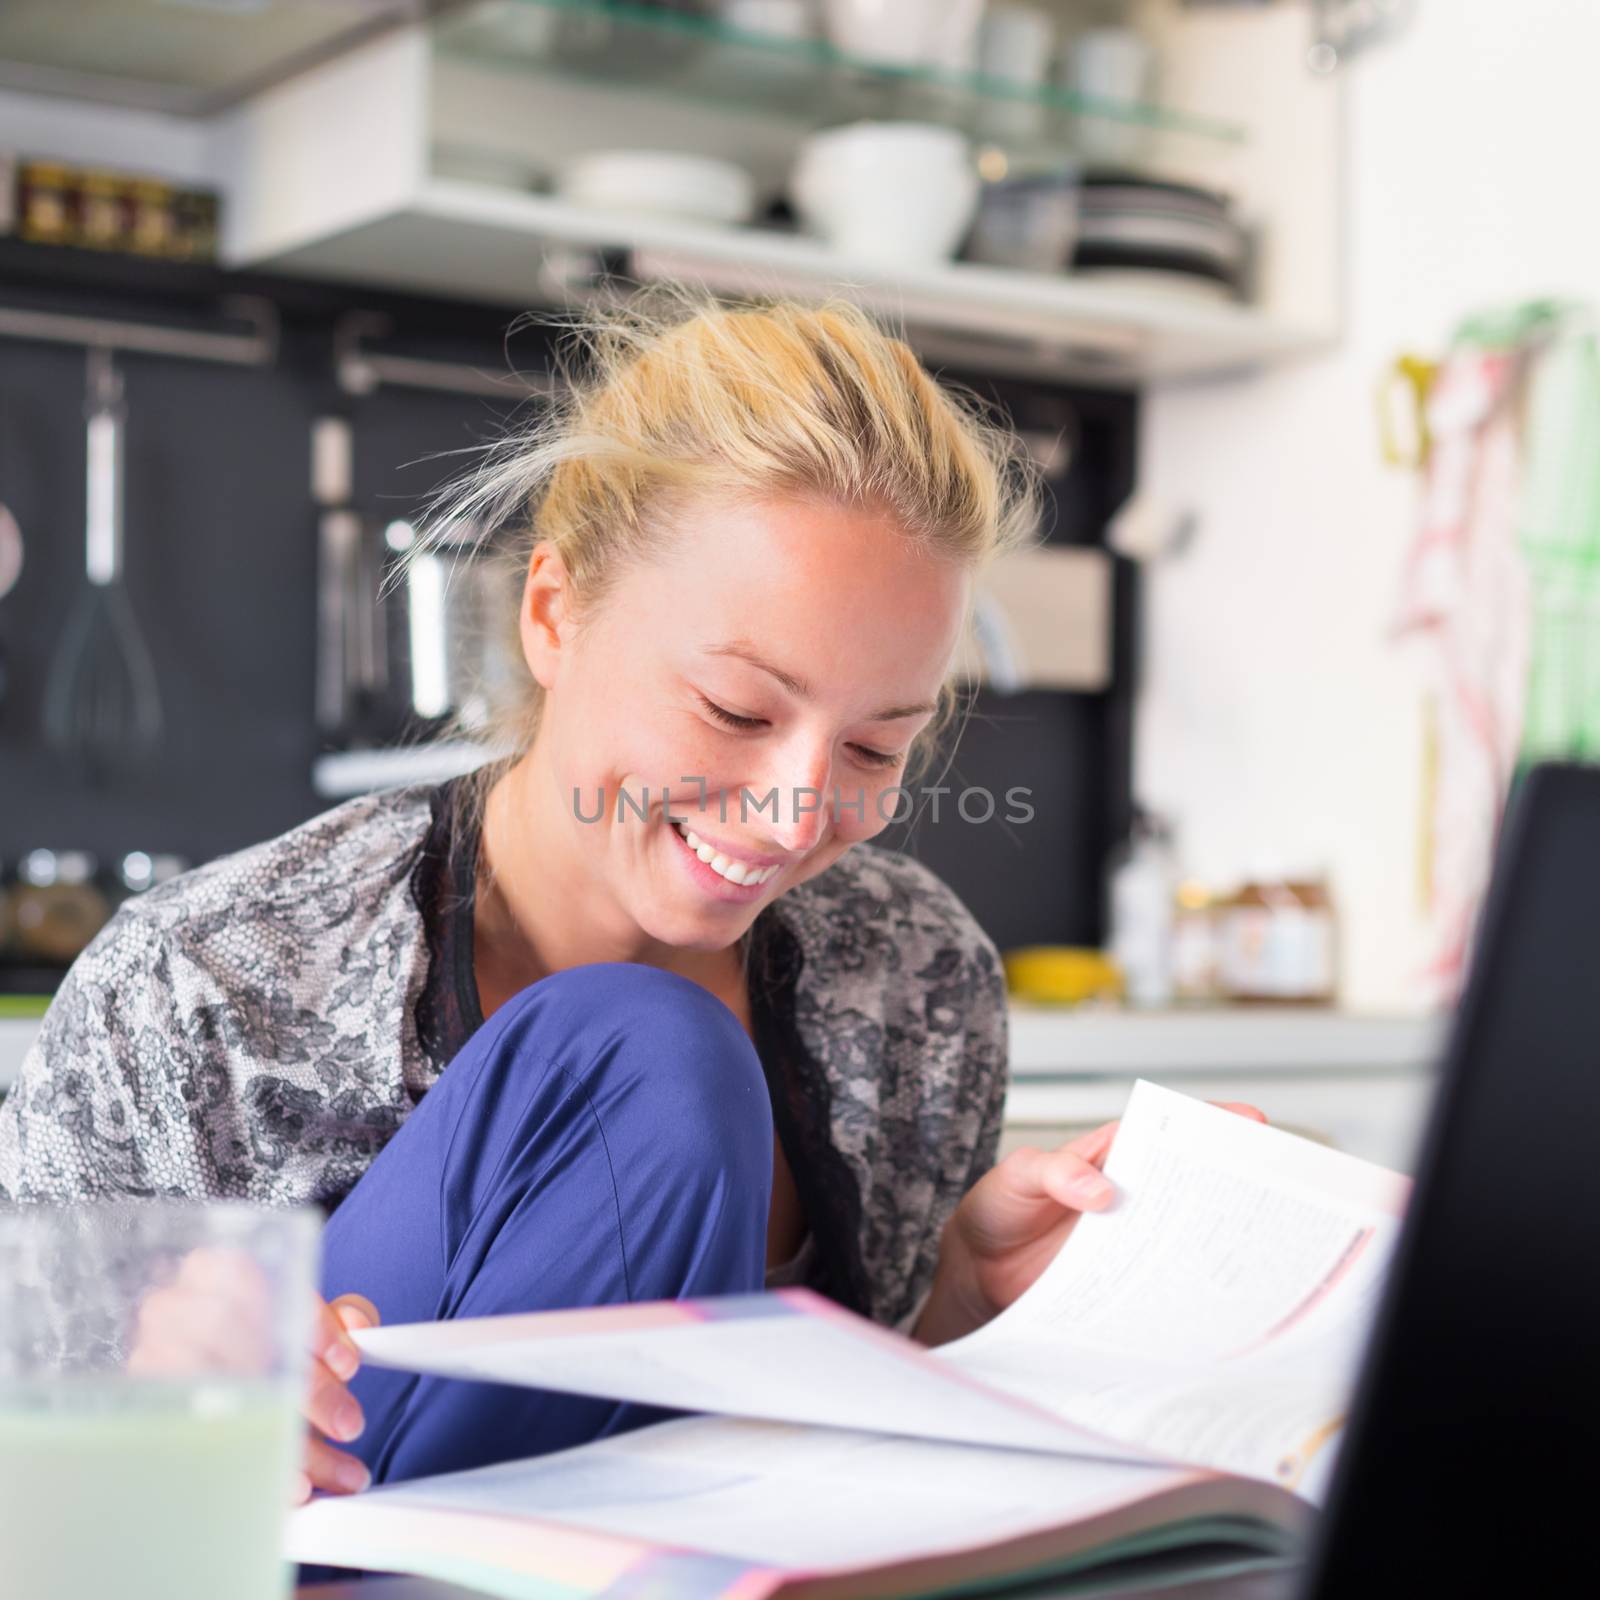 Female student in her casual home clothing working and studying remotly from her small flat in the morning. Home kitchen in the background. Great flexibility of web-based courses and study programmes.